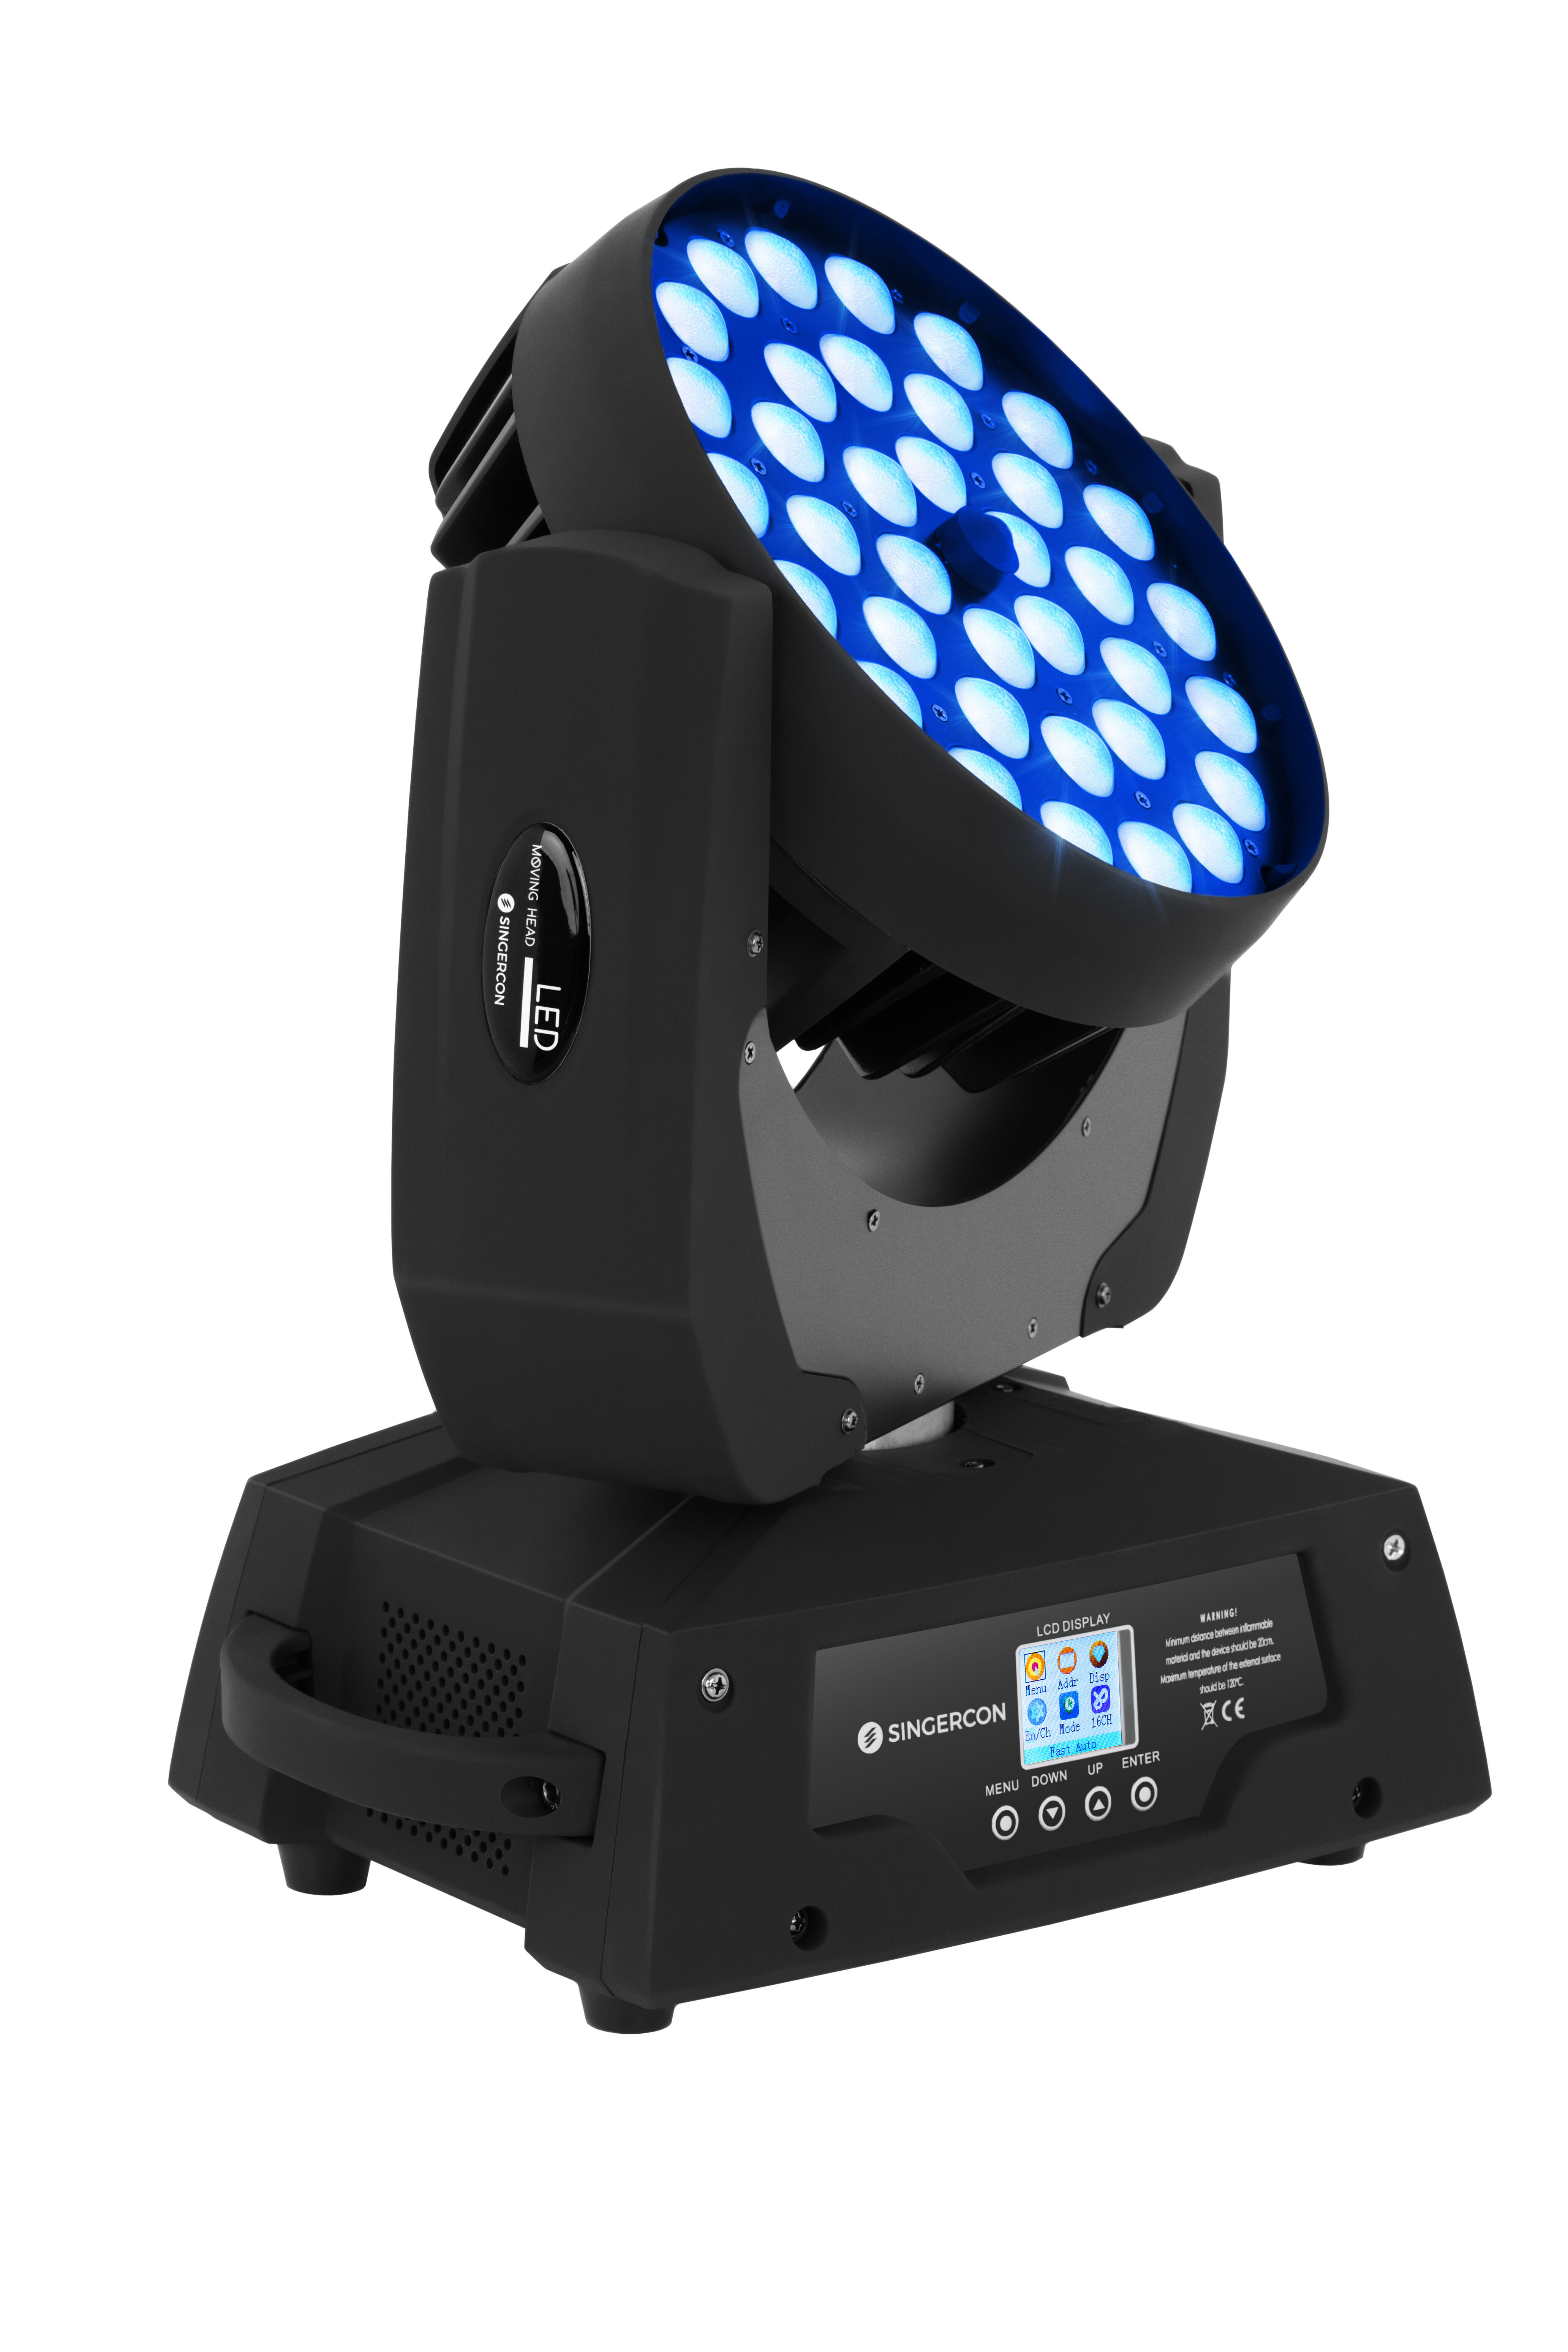 Singercon Moving Head Zoom - 36 LED - 450 W